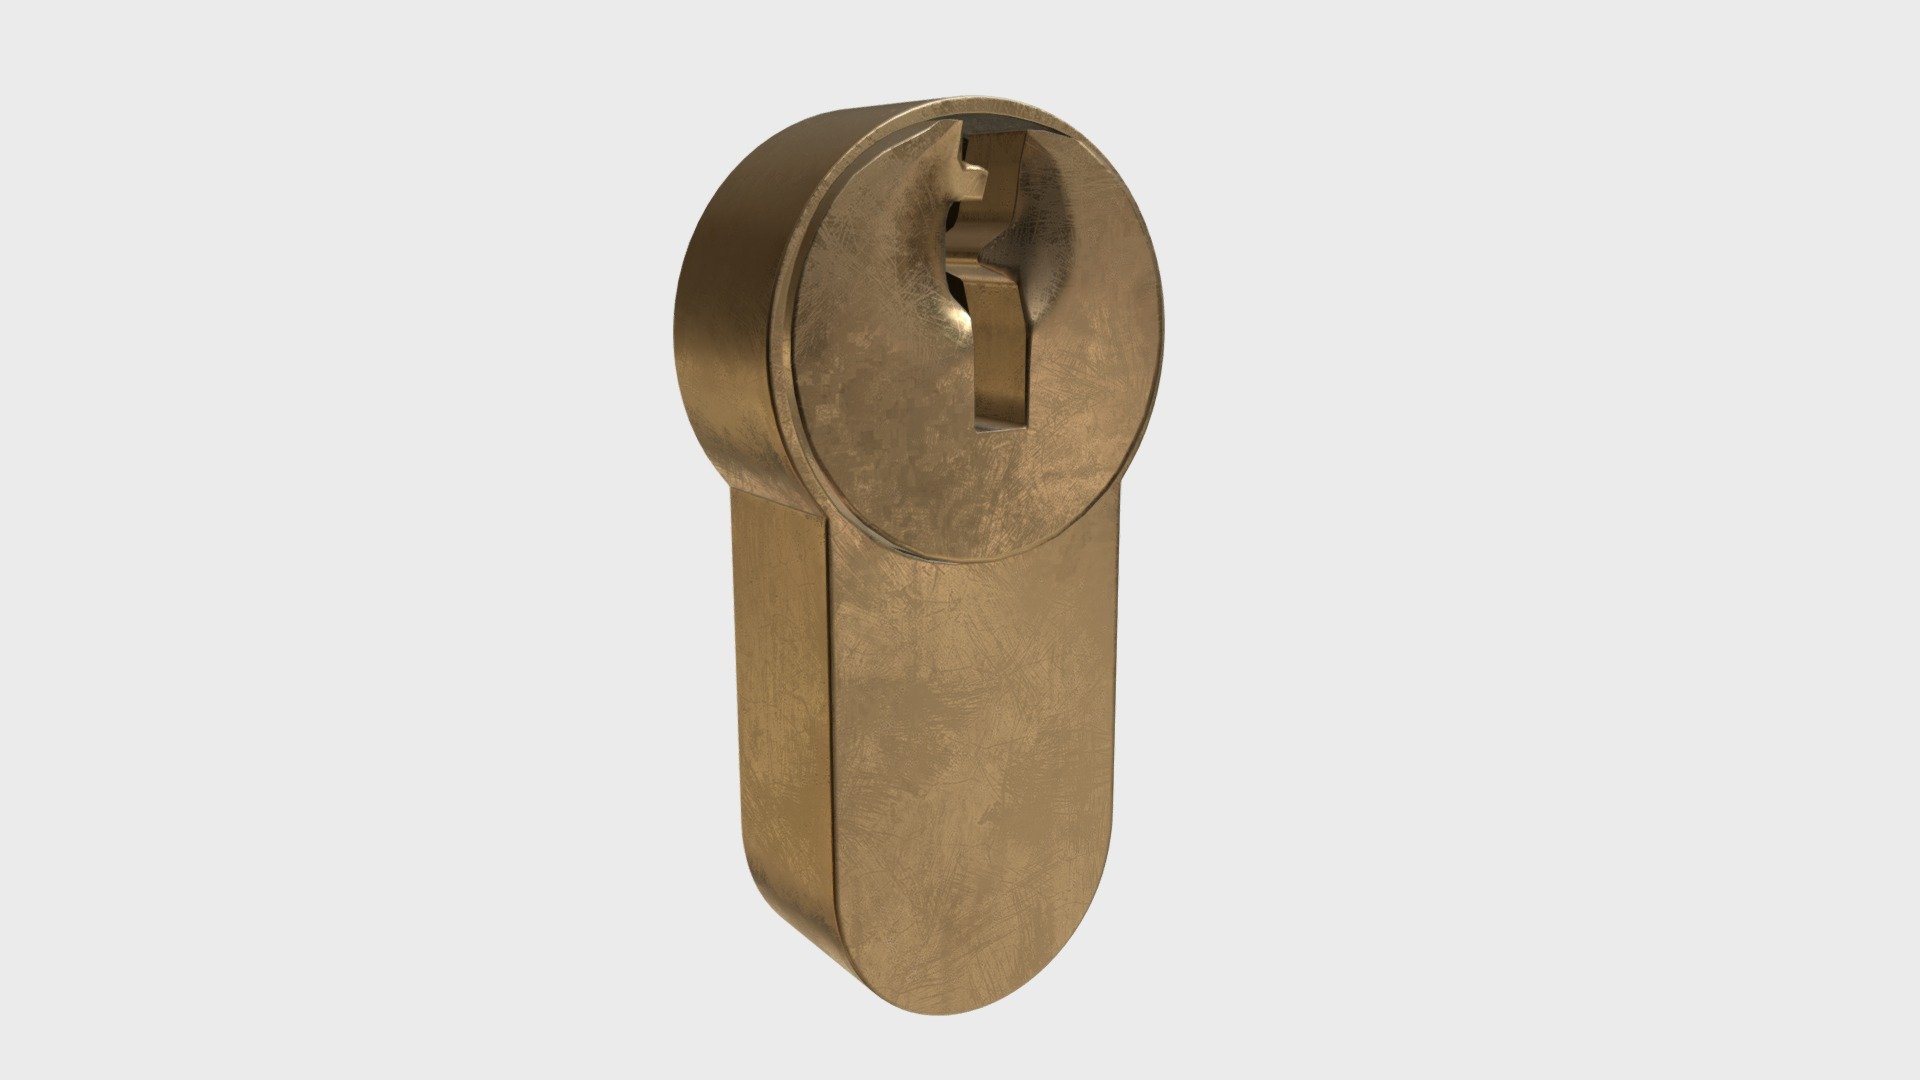 === The following description refers to the additional ZIP package provided with this model ===

Key hole detail 3D Model, nr. 2 in my collection. 2 individual objects (base, rotating part), sharing the same non overlapping UV Layout map, Material and PBR Textures set. Production-ready 3D Model, with PBR materials, textures, non overlapping UV Layout map provided in the package.

Quads only geometries (no tris/ngons).

Formats included: FBX, OBJ; scenes: BLEND (with Cycles / Eevee PBR Materials and Textures); other: 16-bit PNGs with Alpha.

2 Objects (meshes), 1 PBR Material, UV unwrapped (non overlapping UV Layout map provided in the package); UV-mapped Textures.

UV Layout maps and Image Textures resolutions: 2048x2048; PBR Textures made with Substance Painter.

Polygonal, QUADS ONLY (no tris/ngons); 3719 vertices, 3591 quad faces (7182 tris).

Real world dimensions; scene scale units: cm in Blender 3.6.1 LTS (that is: Metric with 0.01 scale).

Uniform scale object (scale applied in Blender 3.6.1 LTS) 3d model